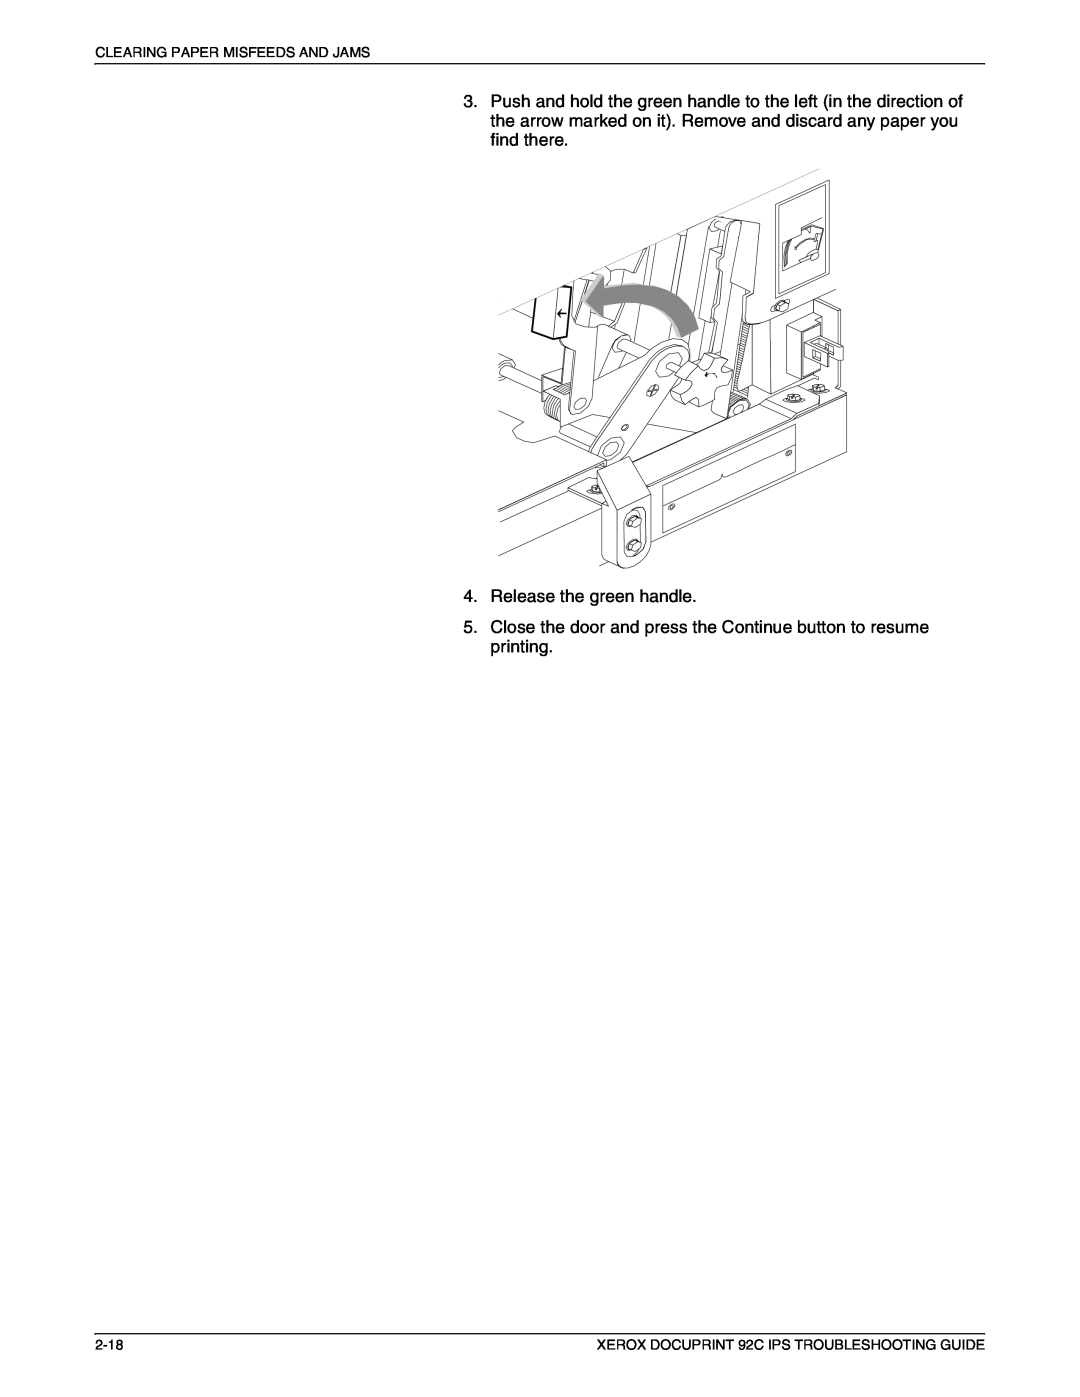 Xerox 92C IPS manual Release the green handle, Close the door and press the Continue button to resume printing, 2-18 